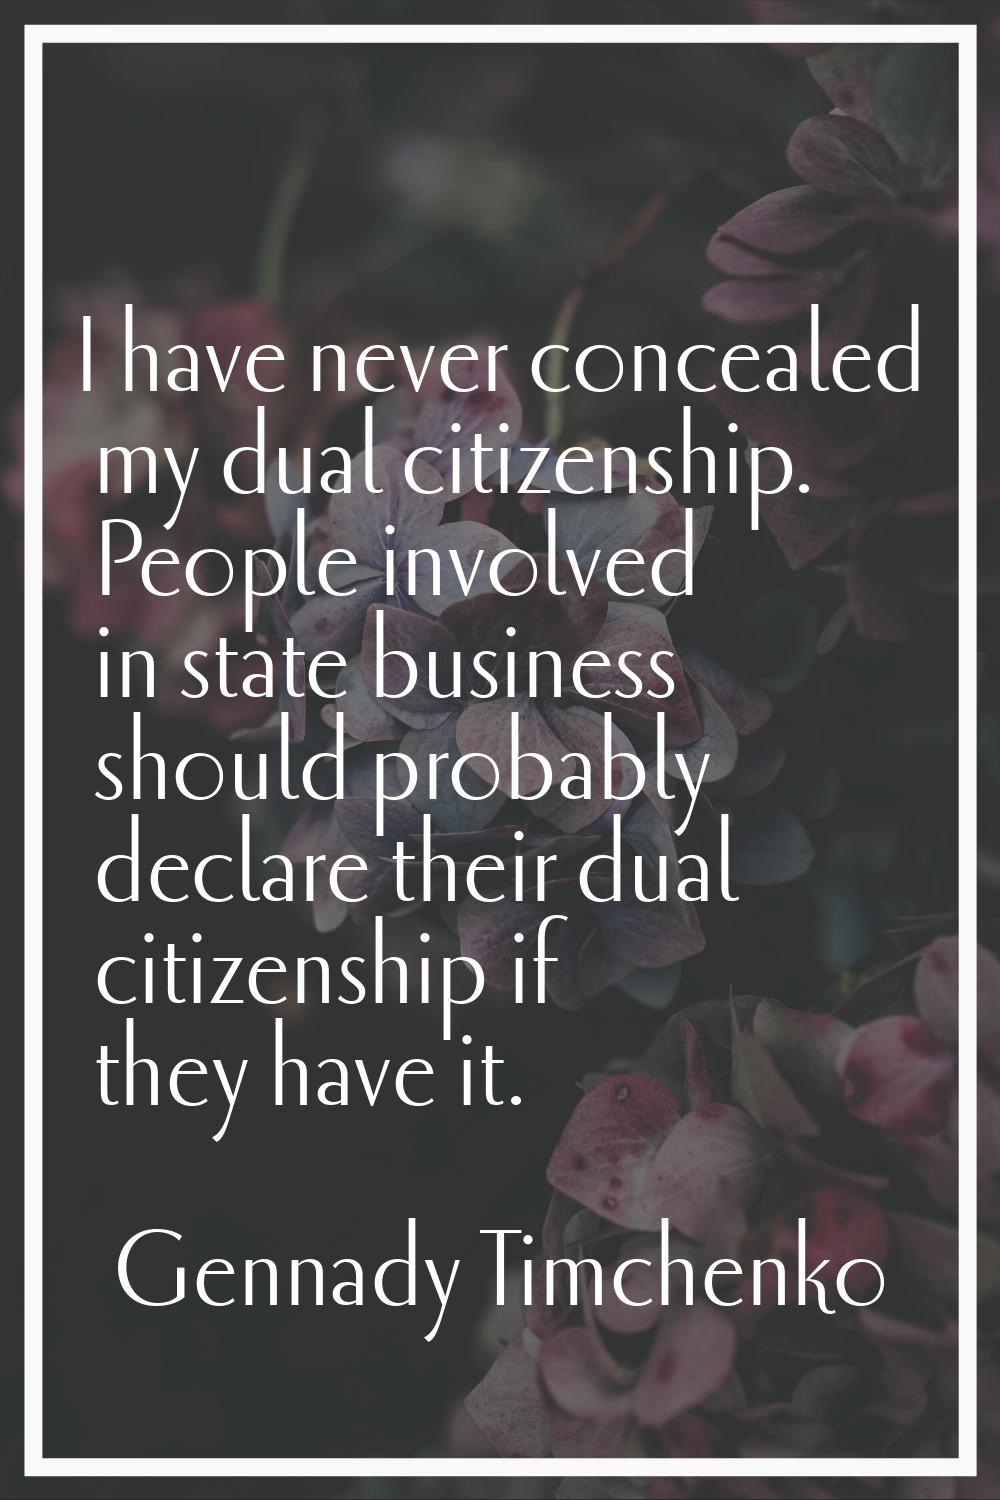 I have never concealed my dual citizenship. People involved in state business should probably decla